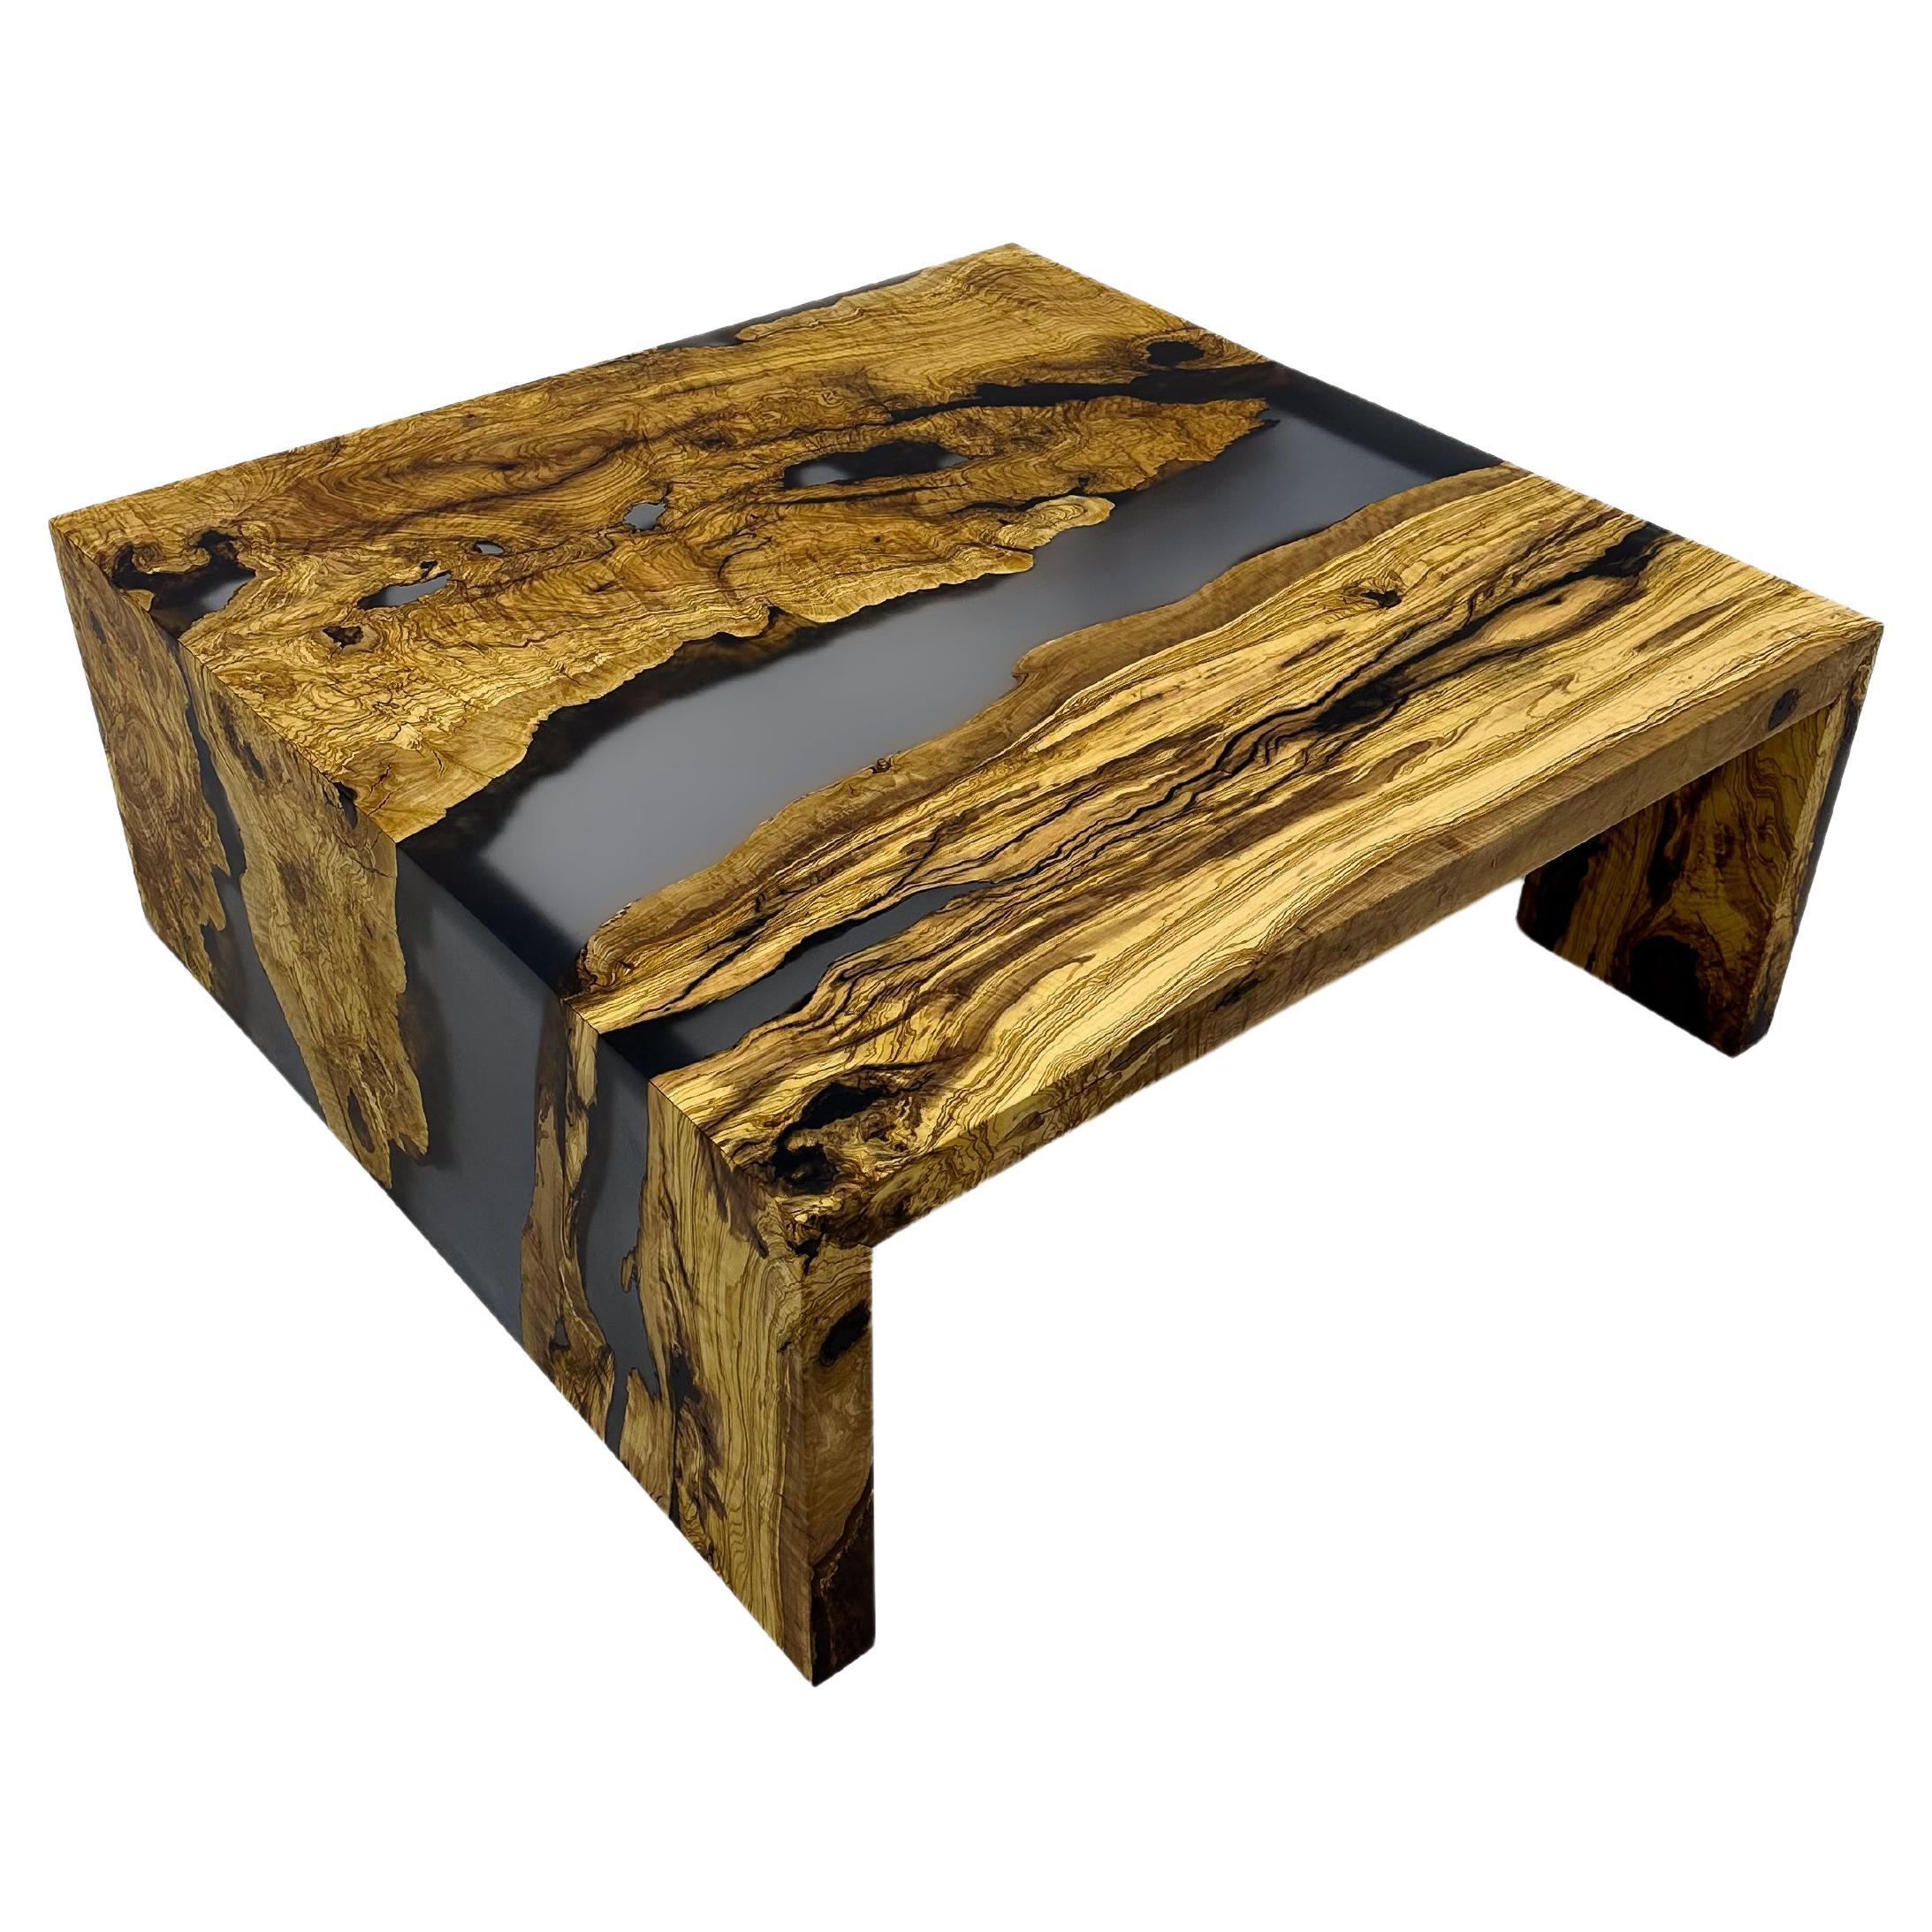 Waterfall Epoxy Resin Coffee Table With Ancient Olive Wood For Sale